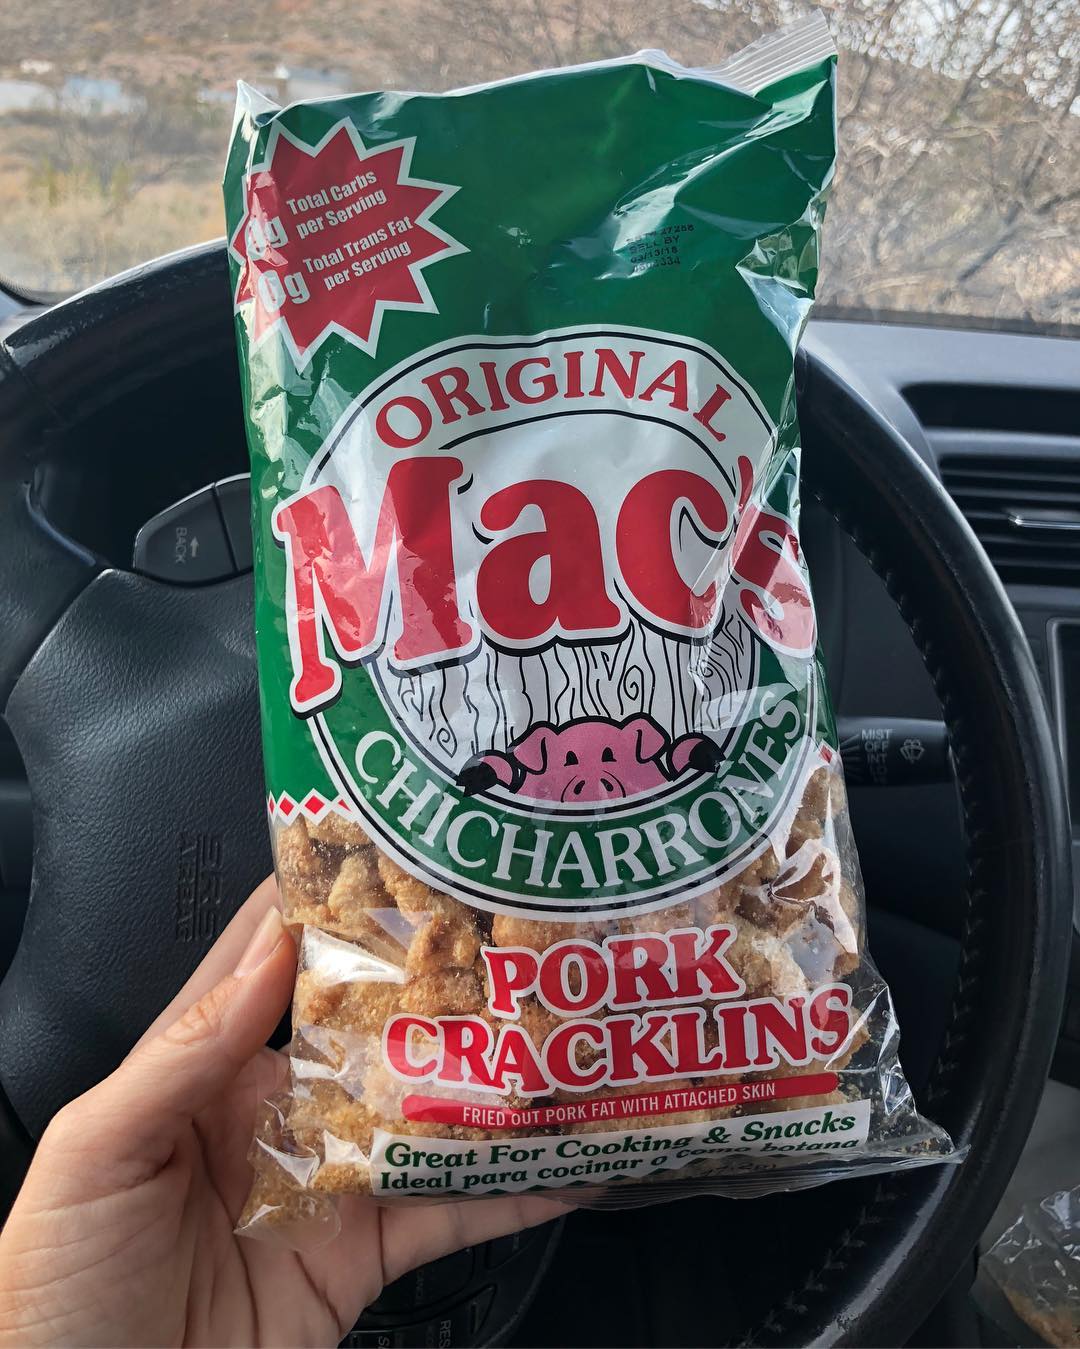 Mac’s Chicharrones are my favorite quick and easy go to snack on Keto!!! These taste a lot better than your regular pork rinds and can be found at Walmart